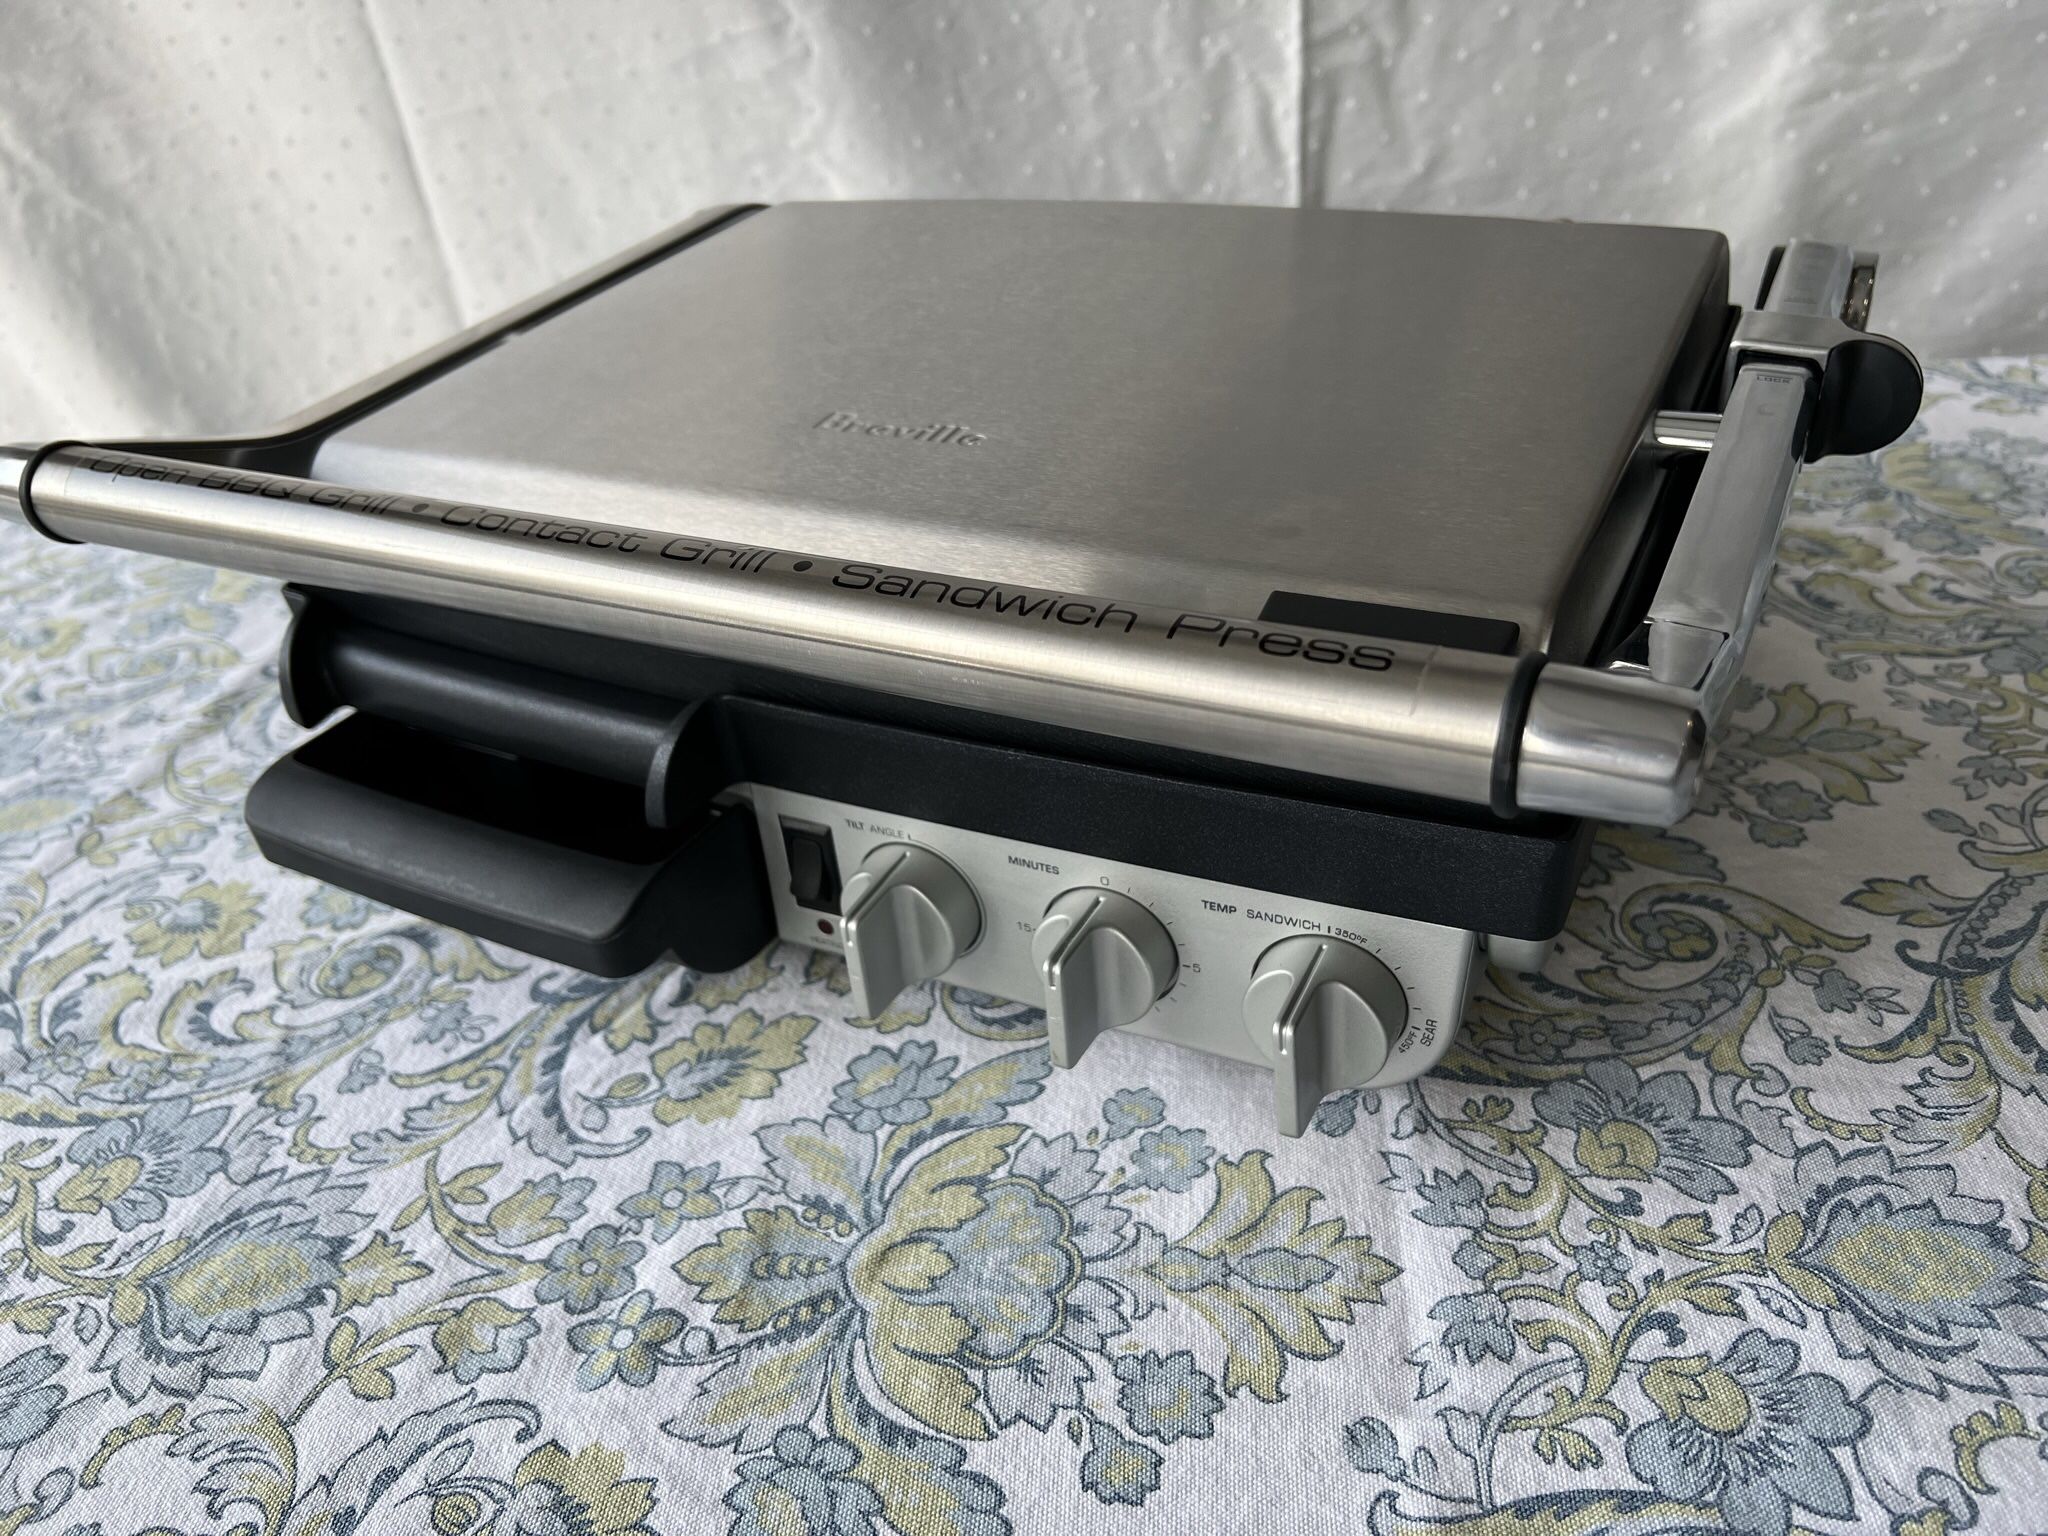 Breville BGR820XL Smart Grill, Electric Countertop Grill Panini Press for  Sale in Westlake Village, CA - OfferUp